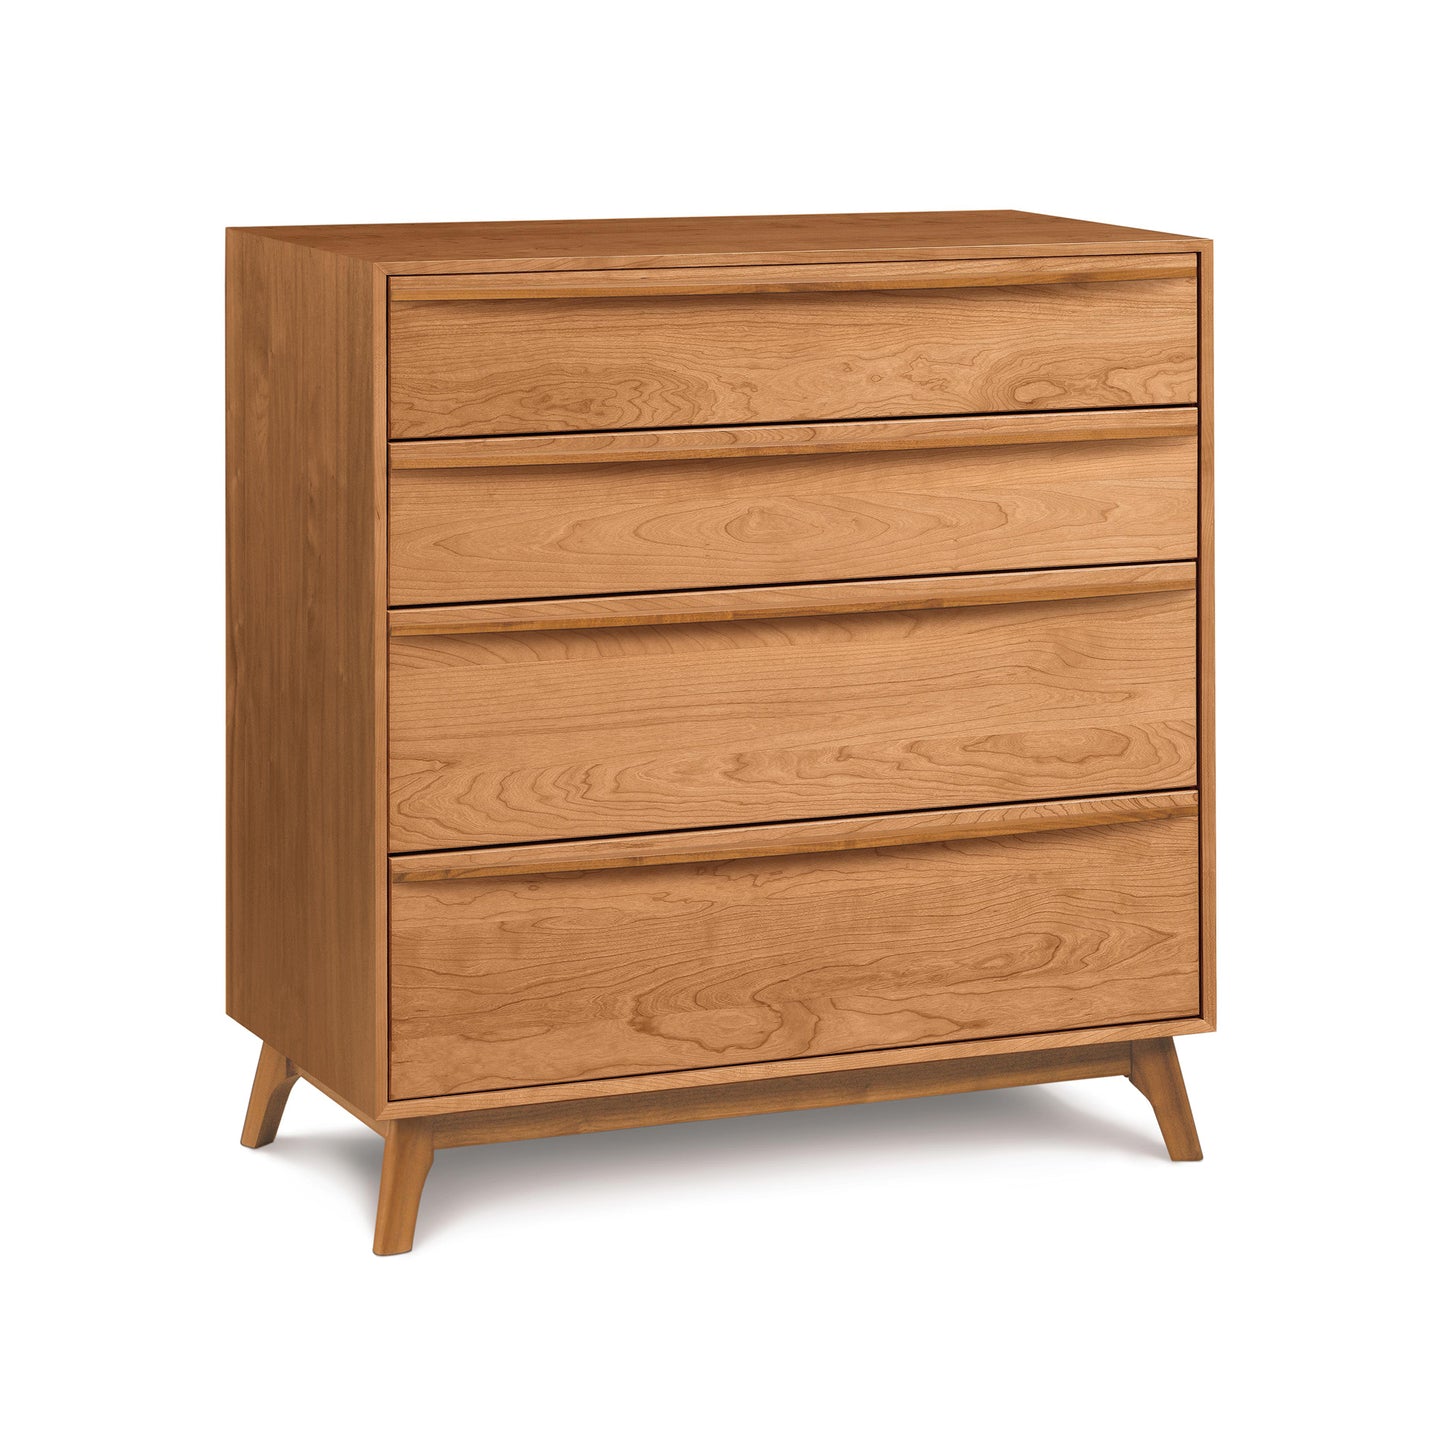 A modern bedroom wooden chest of drawers handmade in Vermont, featuring the Copeland Furniture Catalina 4-Drawer Chest, showcased on a white background.